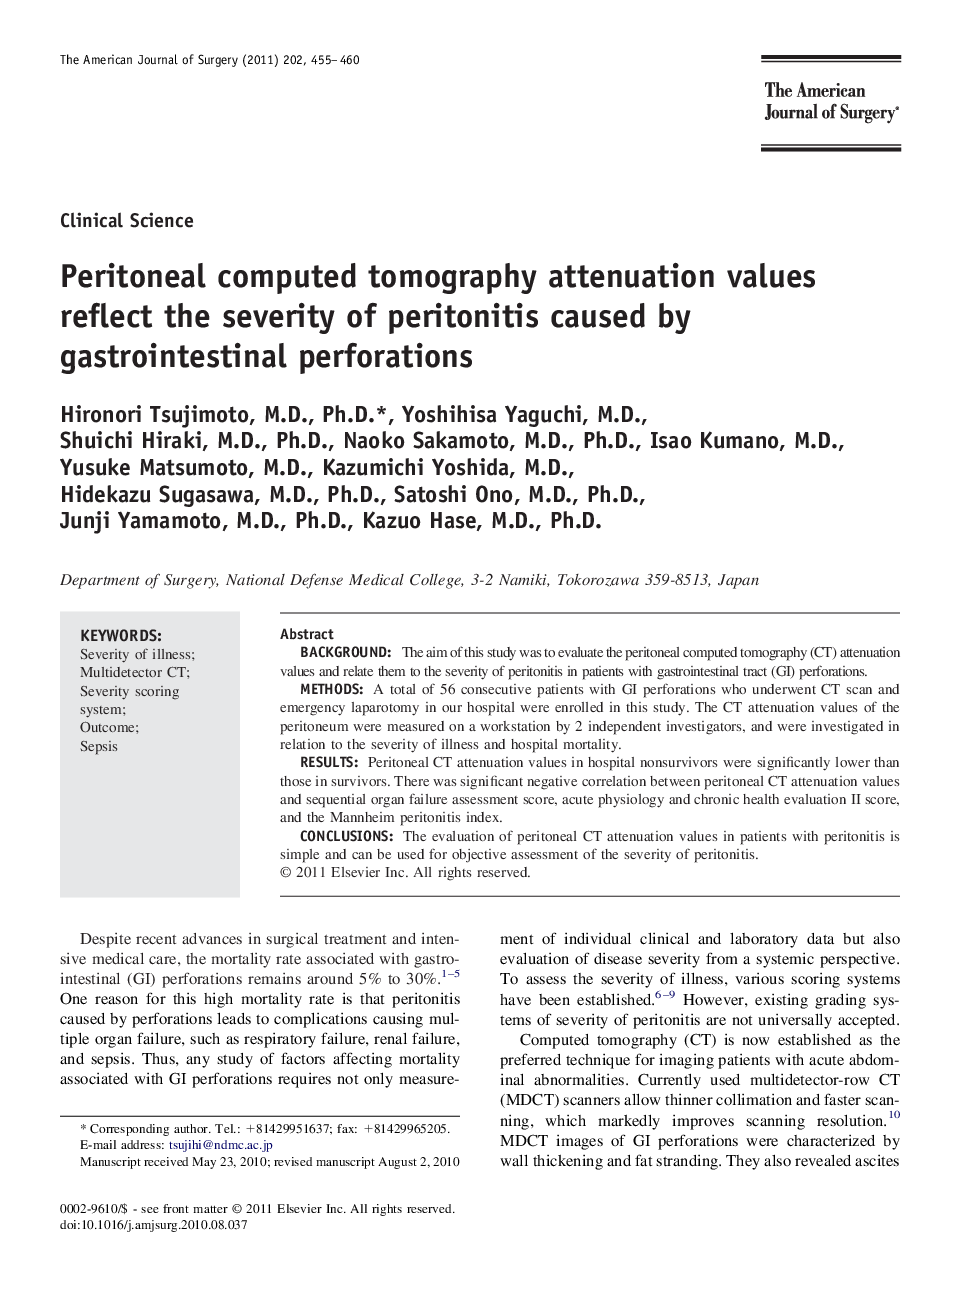 Peritoneal computed tomography attenuation values reflect the severity of peritonitis caused by gastrointestinal perforations